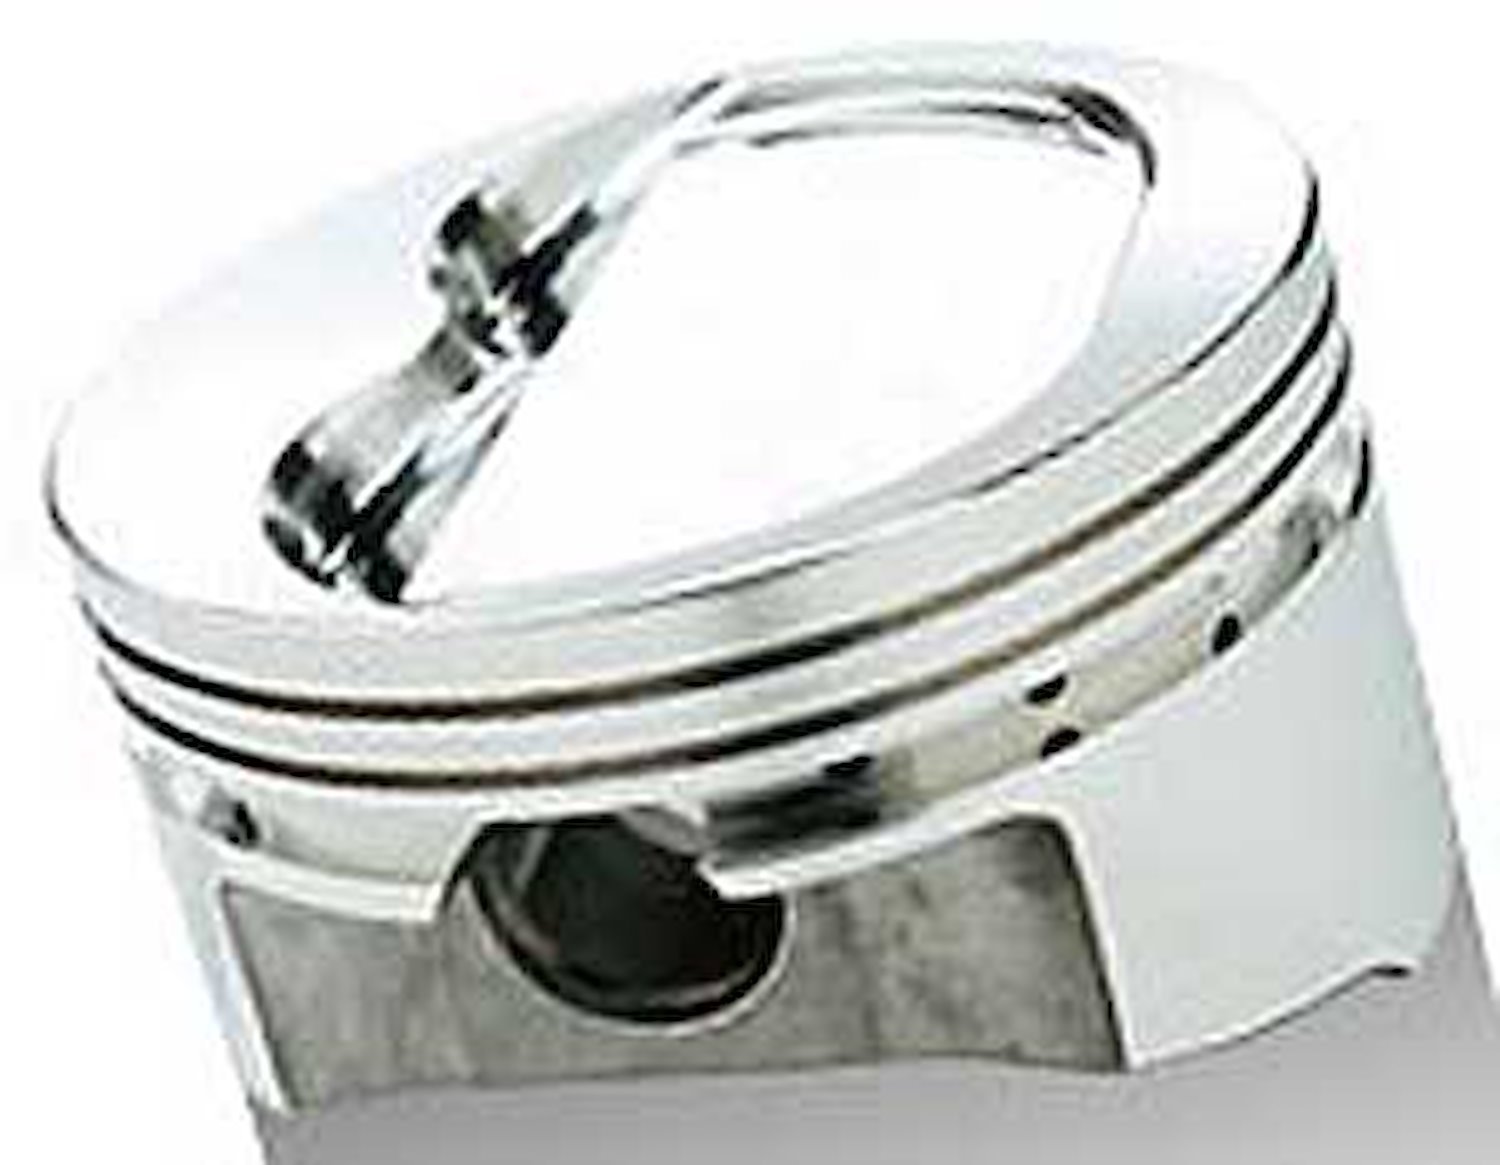 SRP Inverted Dome Pistons for Small Block Chevy Bore 4.000"